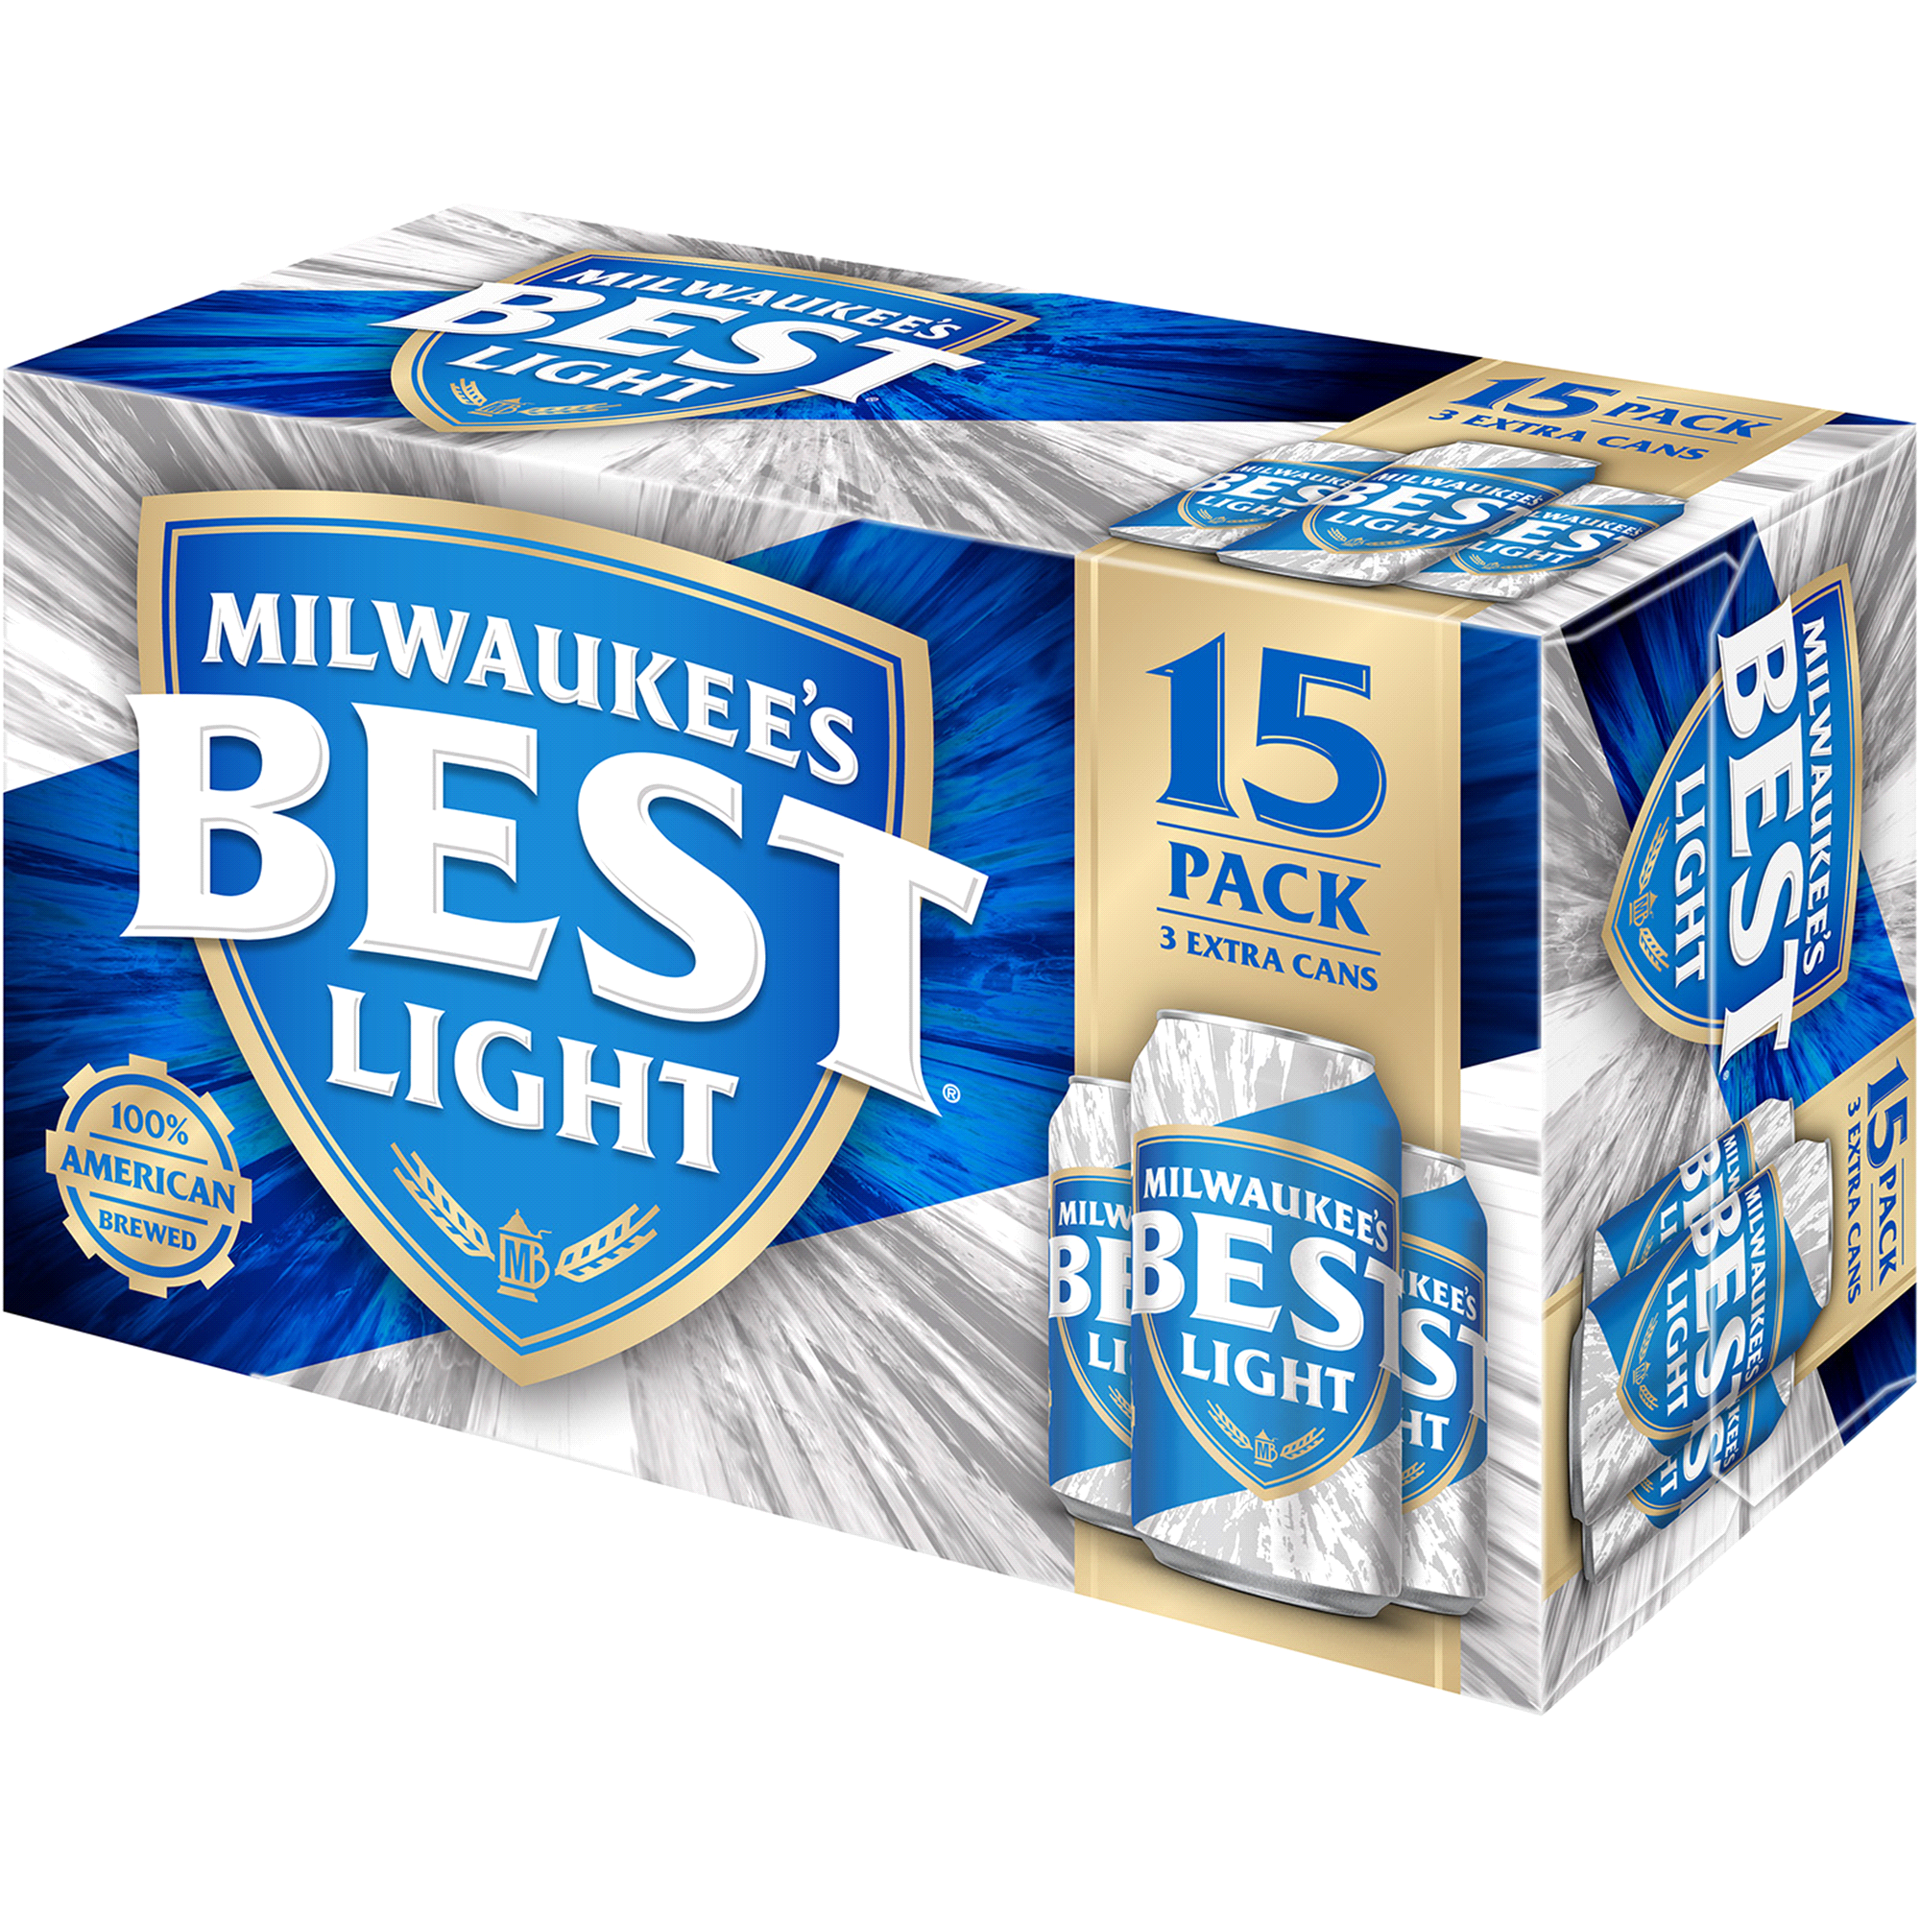 slide 13 of 13, Milwaukee's Best American Lager, 4.1% ABV, 15-pack, 12-oz. beer cans, 15 ct; 12 fl oz